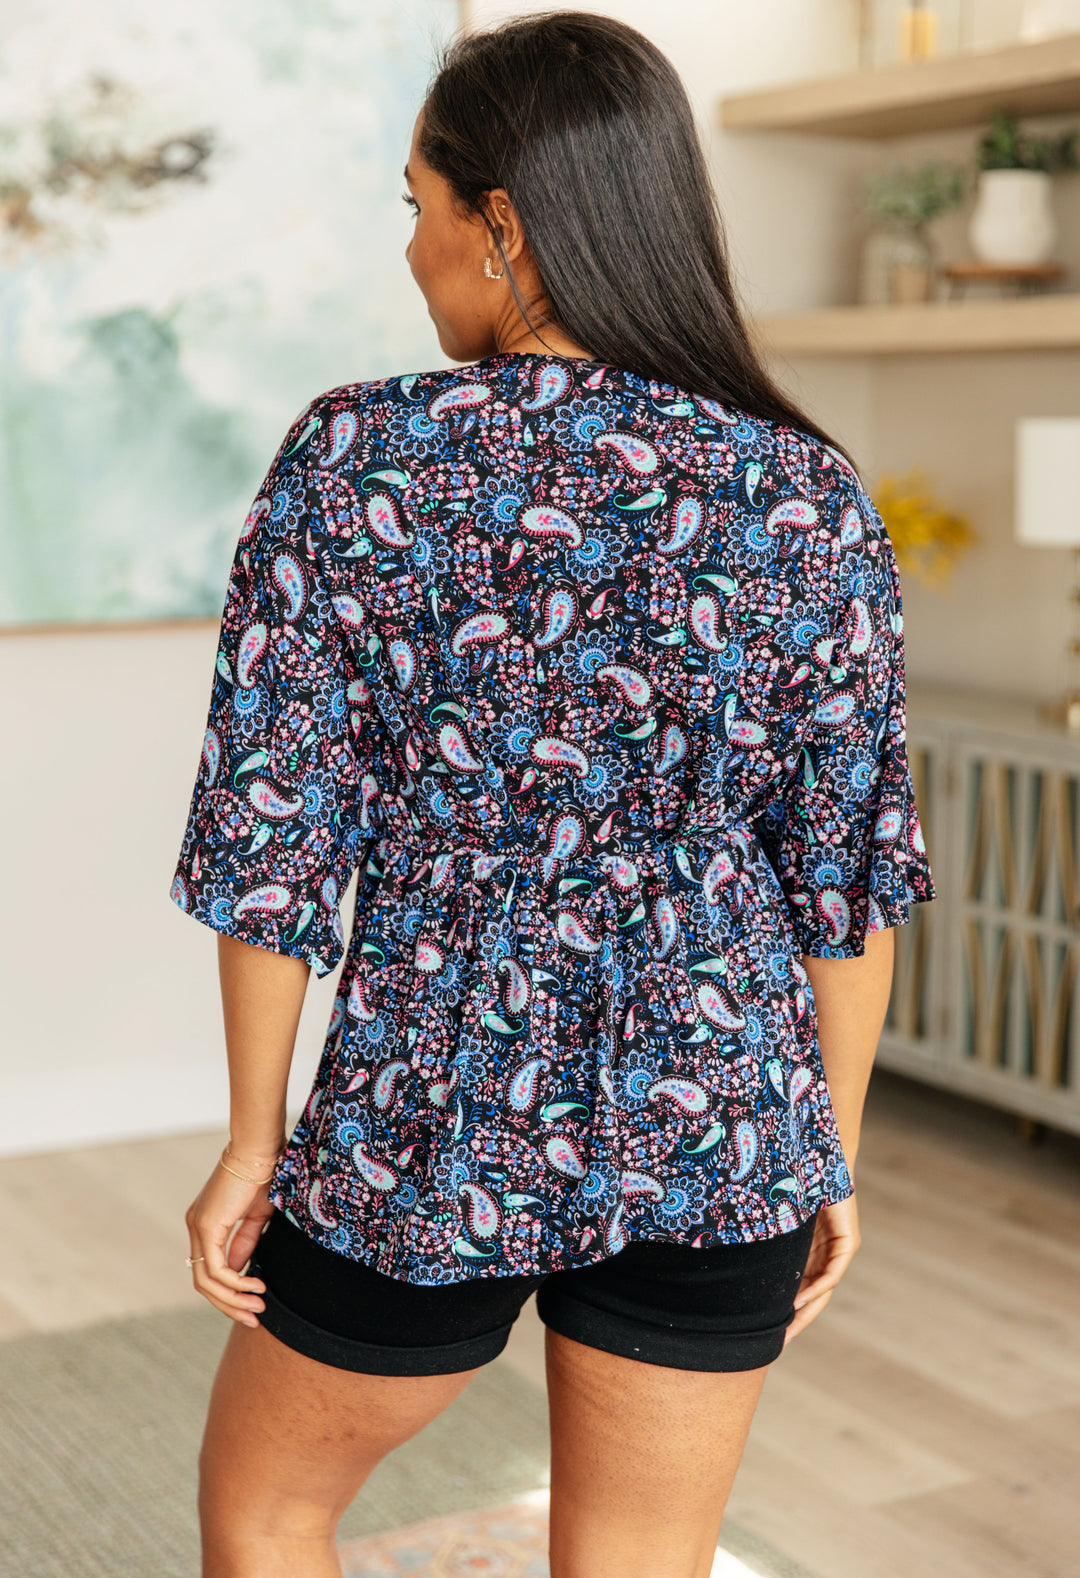 Peplum Top in Black and Periwinkle Paisley